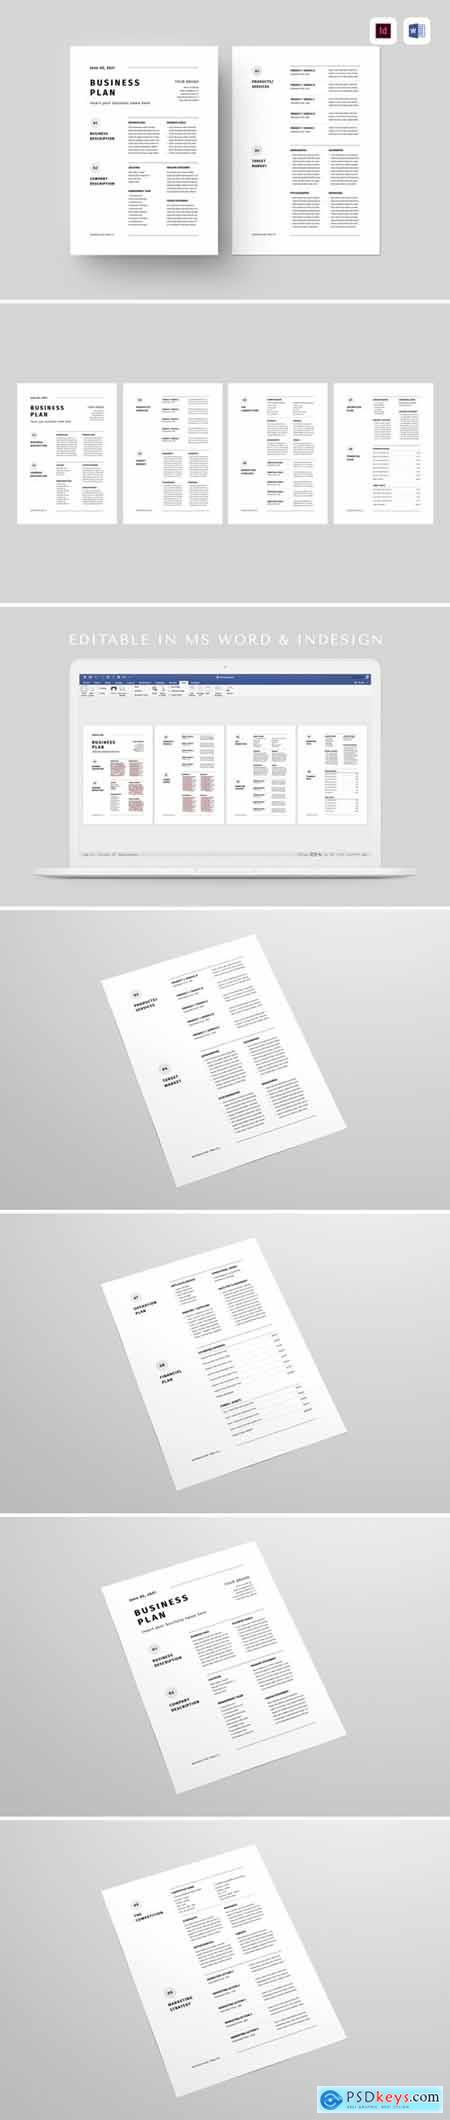 Business Plan - MS Word & Indesign